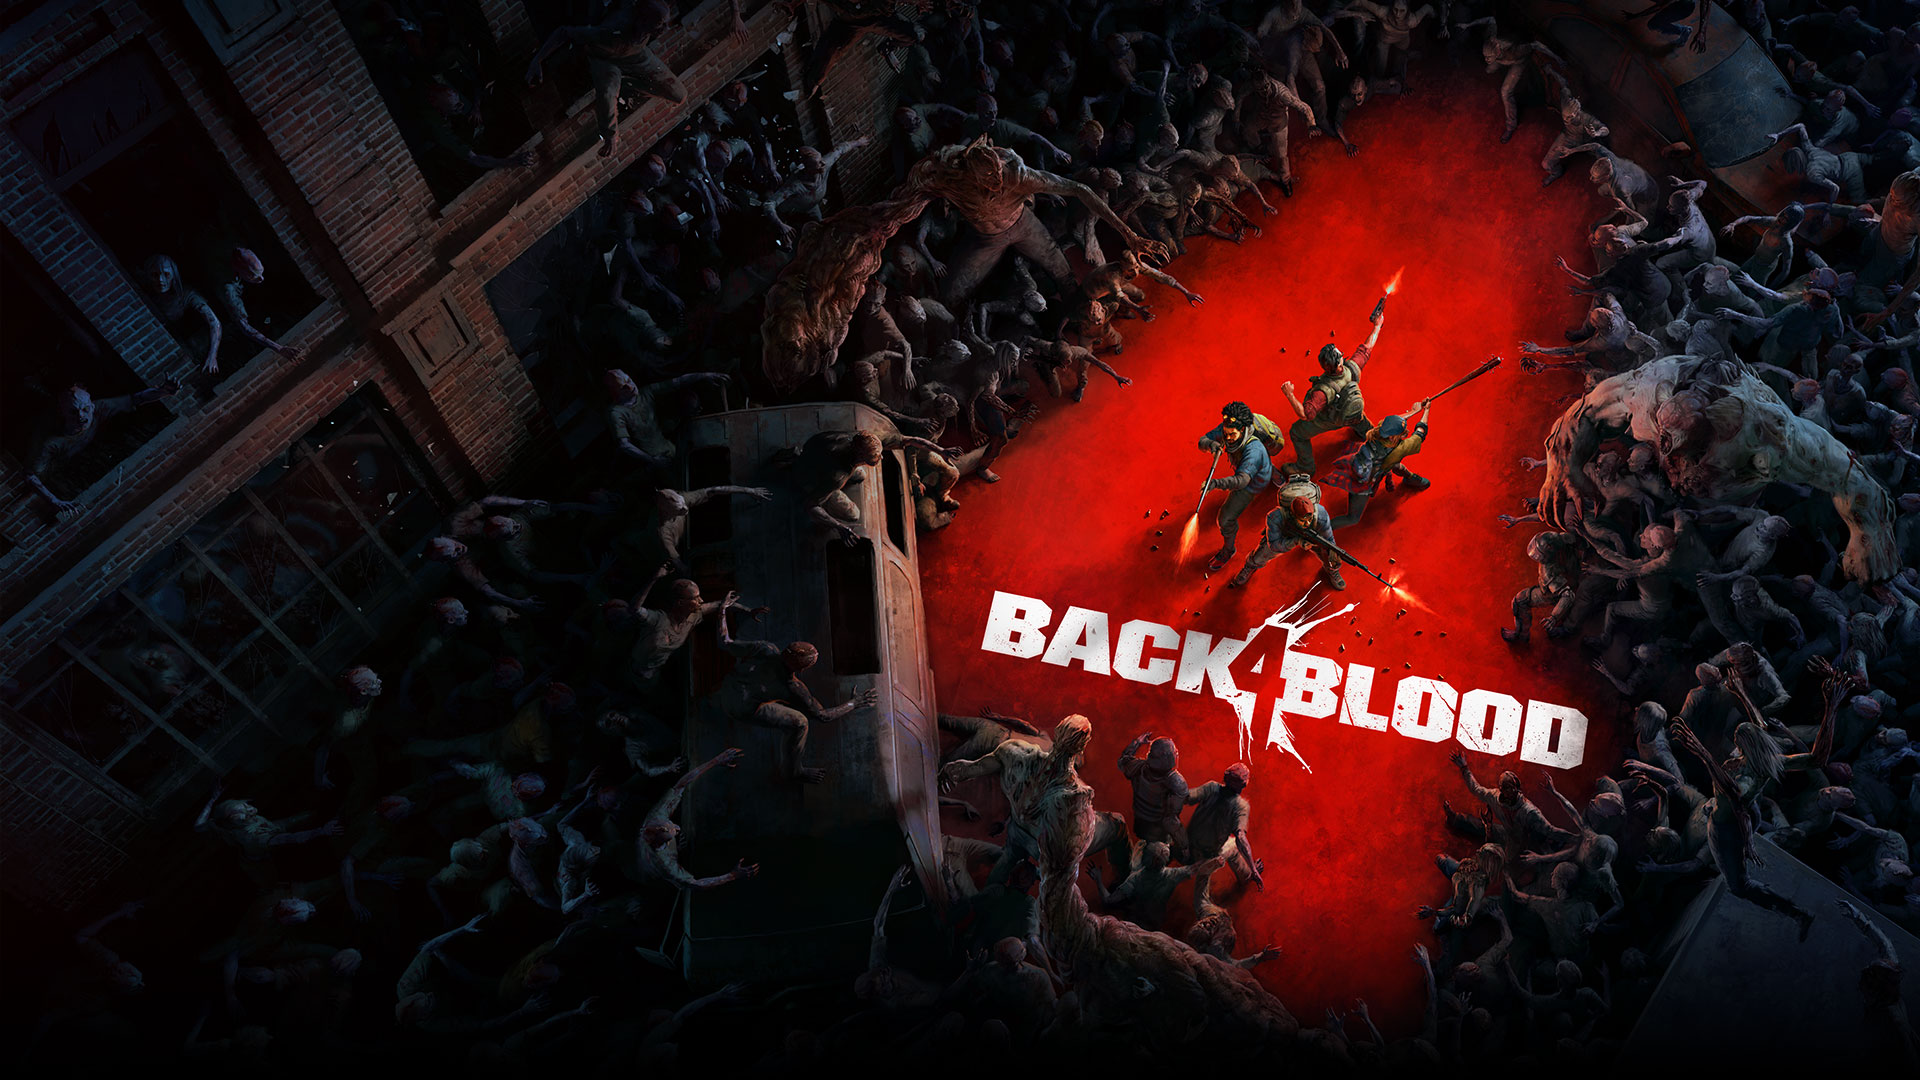 Back 4 Blood, A horde of zombies in the shape of a number 4 surrounds a group of characters.